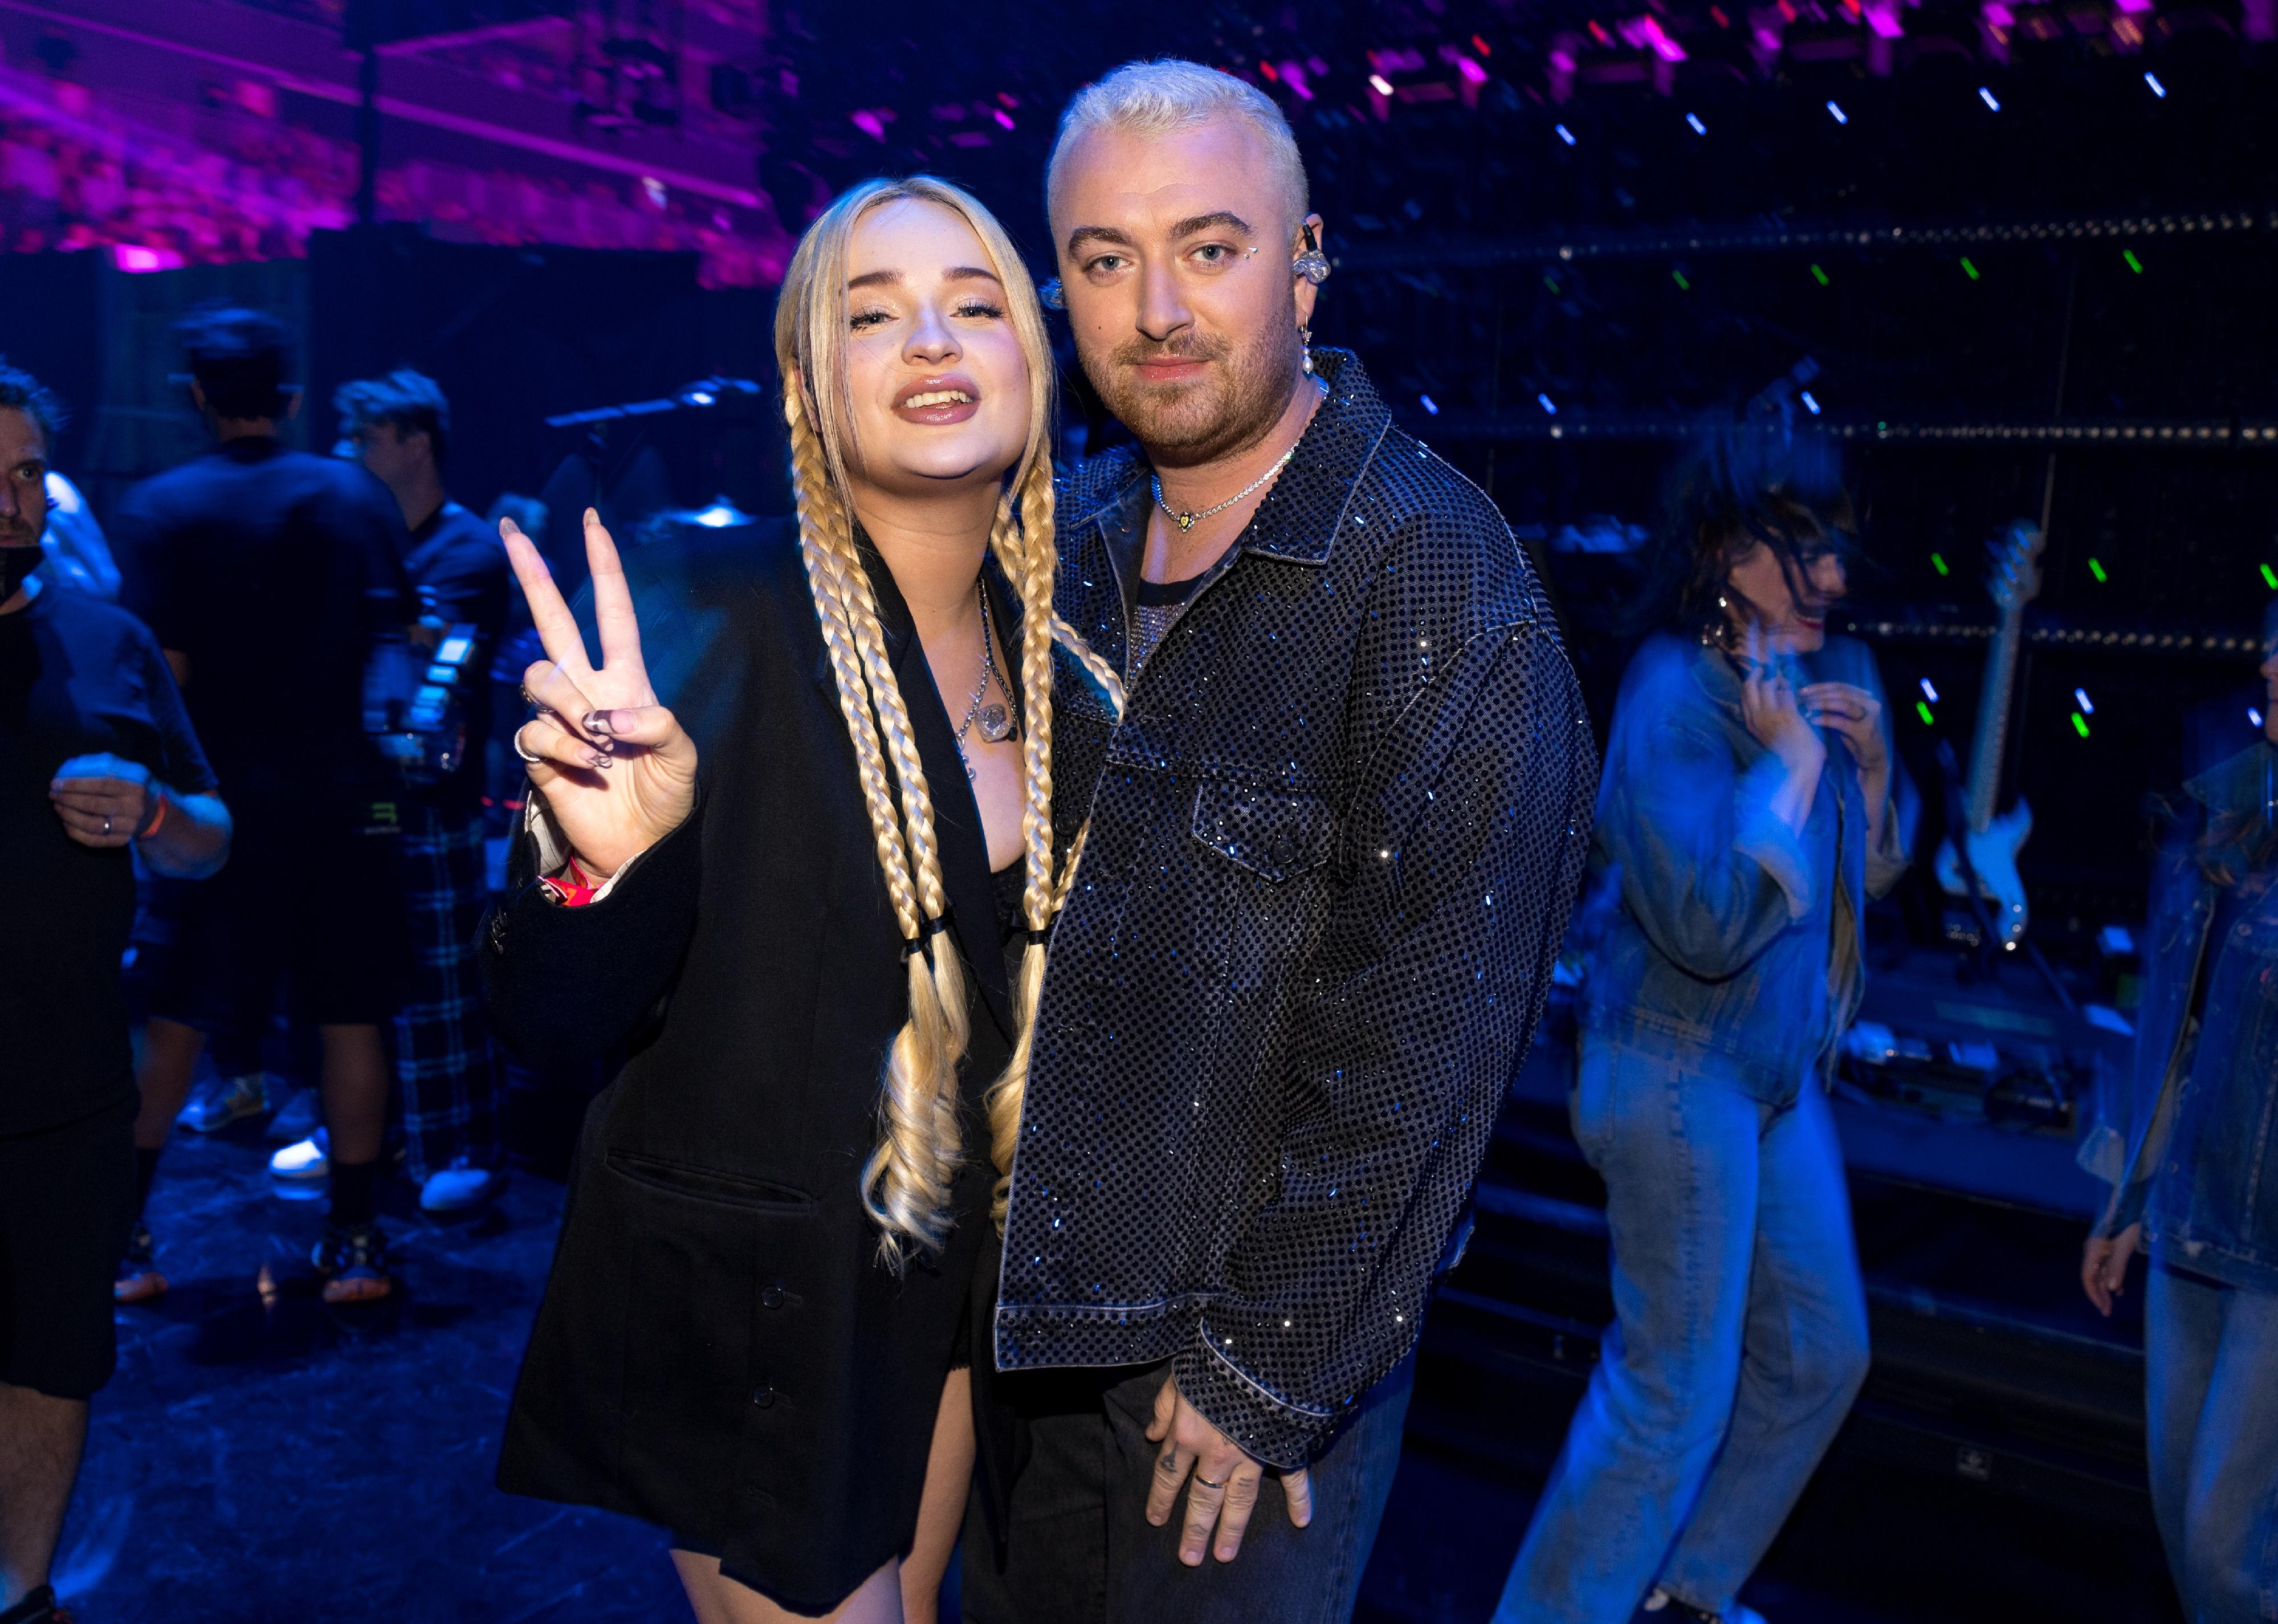 Kim Petras and Sam Smith backstage at the T-Mobile Arena in Las Vegas, Nevada. 